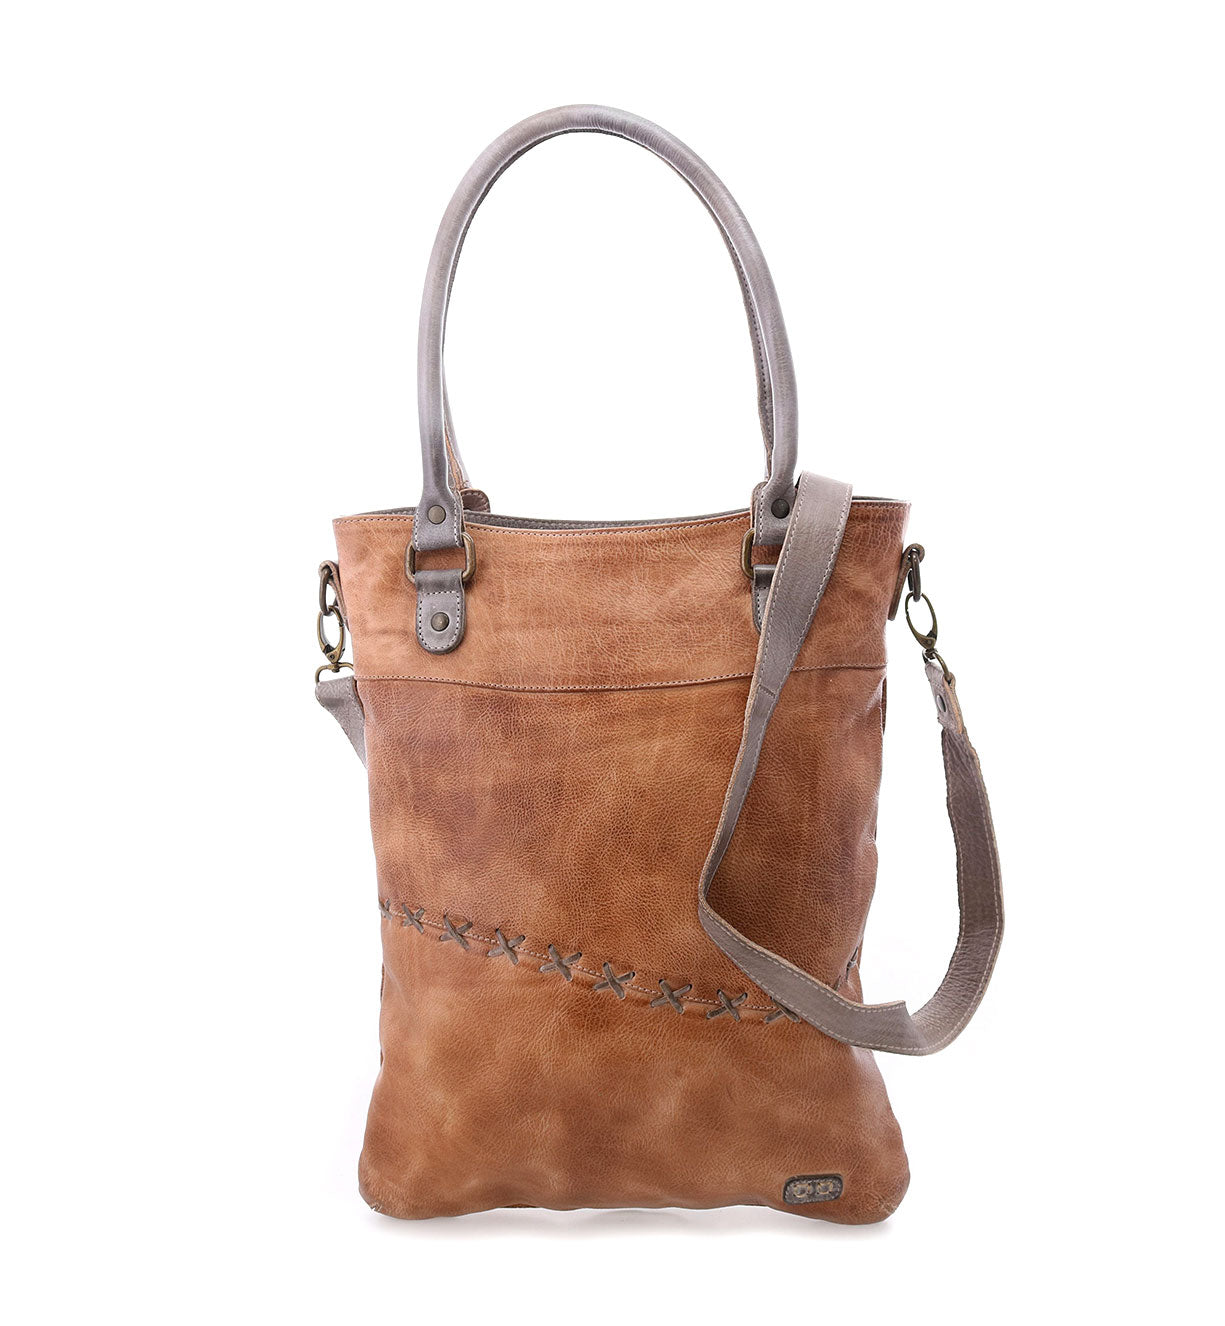 A brown leather Celta tote bag with a shoulder strap by Bed Stu.